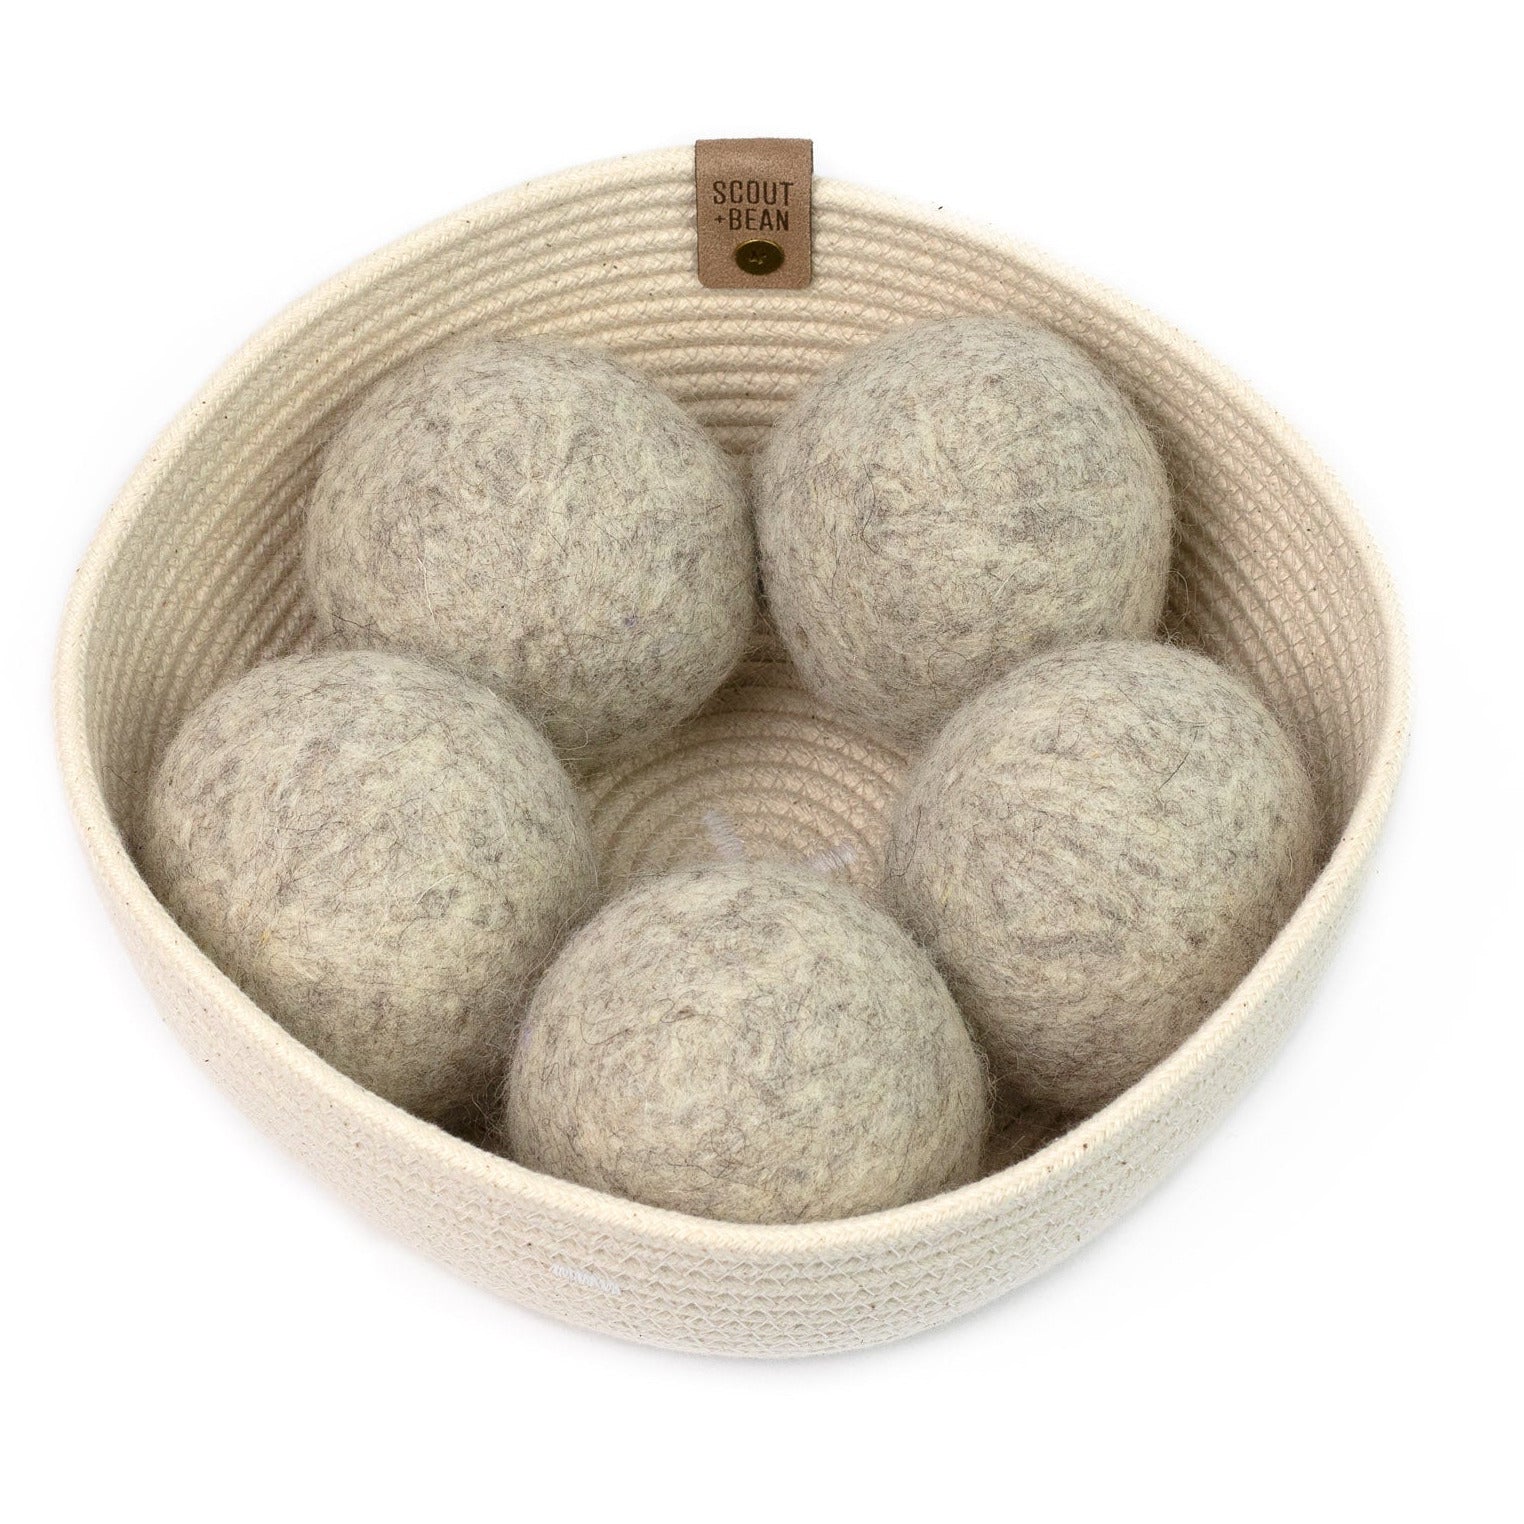 Do wool dryer balls work? Ways to use them effectively - By Oily Design